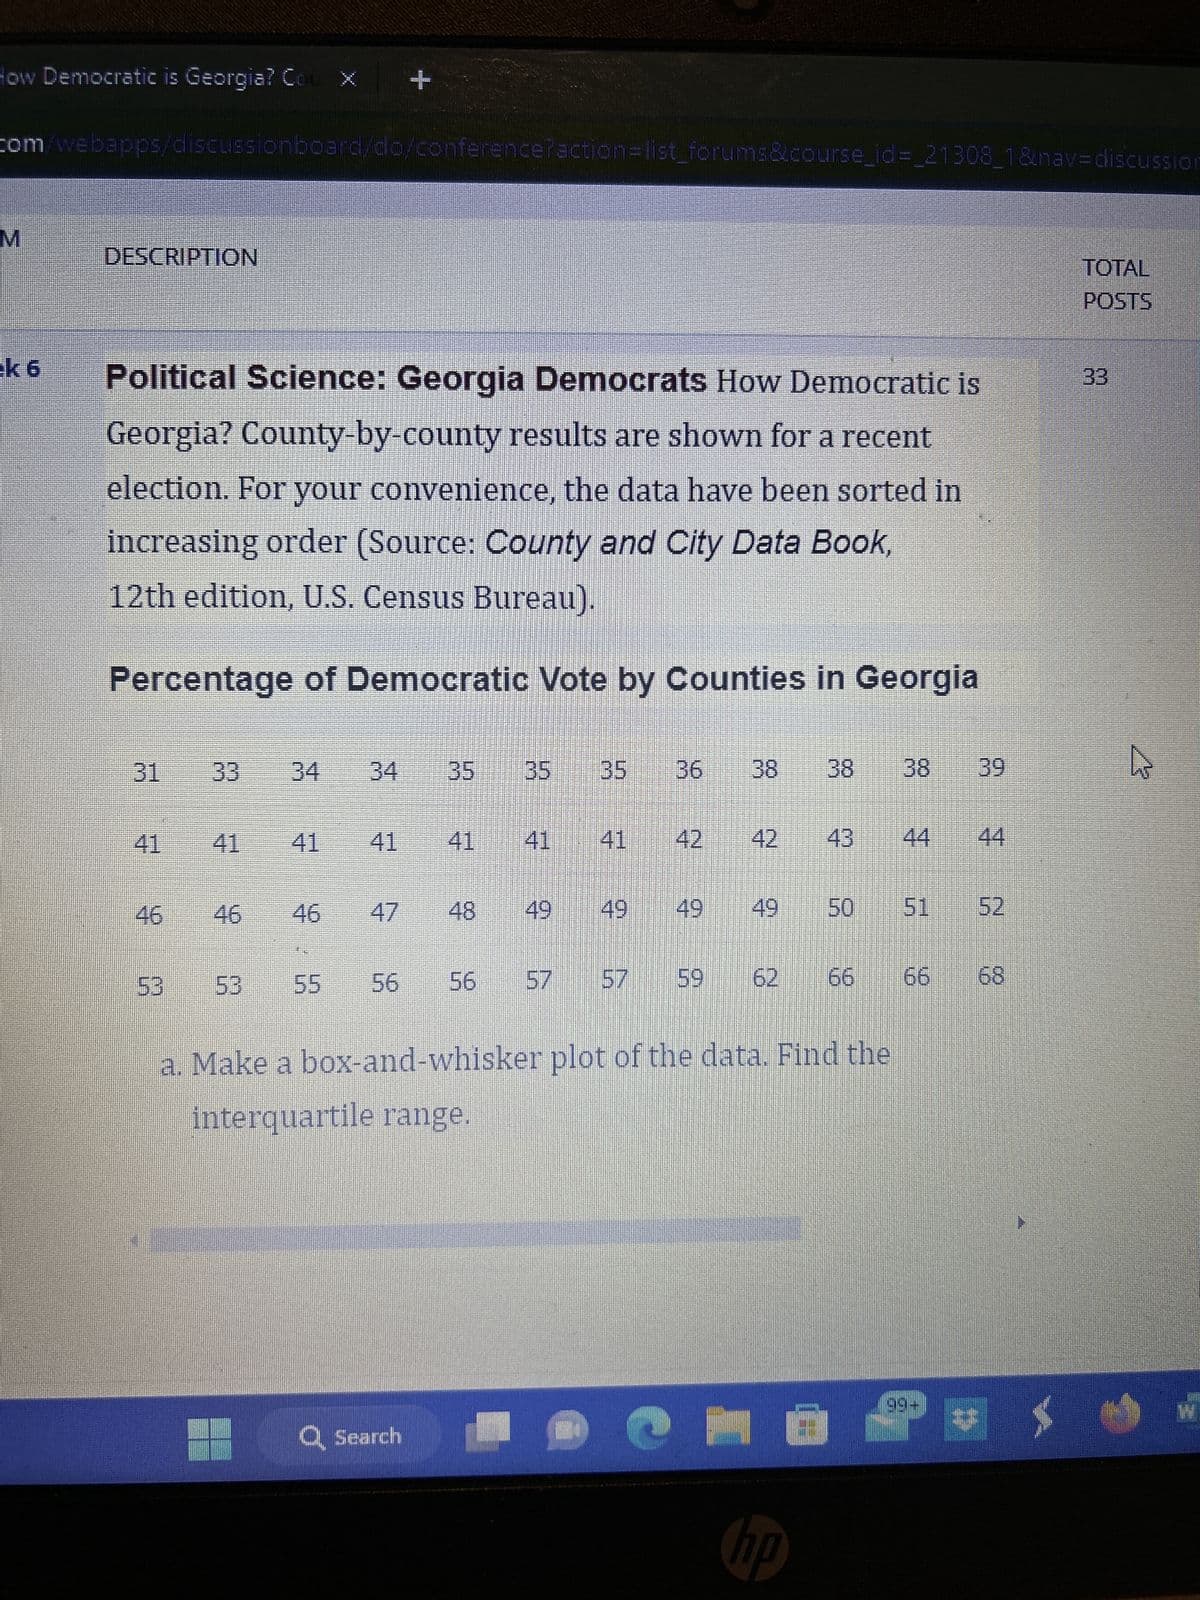 How Democratic is Georgia? Cou X
com/webapps/discussionboard/do/conference?action=list_forums&course_id=_21308_1&nav=discussion
M
ek 6
DESCRIPTION
Political Science: Georgia Democrats How Democratic is
Georgia? County-by-county results are shown for a recent
election. For your convenience, the data have been sorted in
increasing order (Source: County and City Data Book,
12th edition, U.S. Census Bureau).
Percentage of Democratic Vote by Counties in Georgia
31
41
33 34 34
46
55
+
56
Q Search
5
2
5
49
7
9
S
56 57 57 59
G
38 38 39
43
- ©
hp
a. Make a box-and-whisker plot of the data. Find the
interquartile range.
50
66
$
$
♫
8
V
N
8
TOTAL
POSTS
33
hs
W